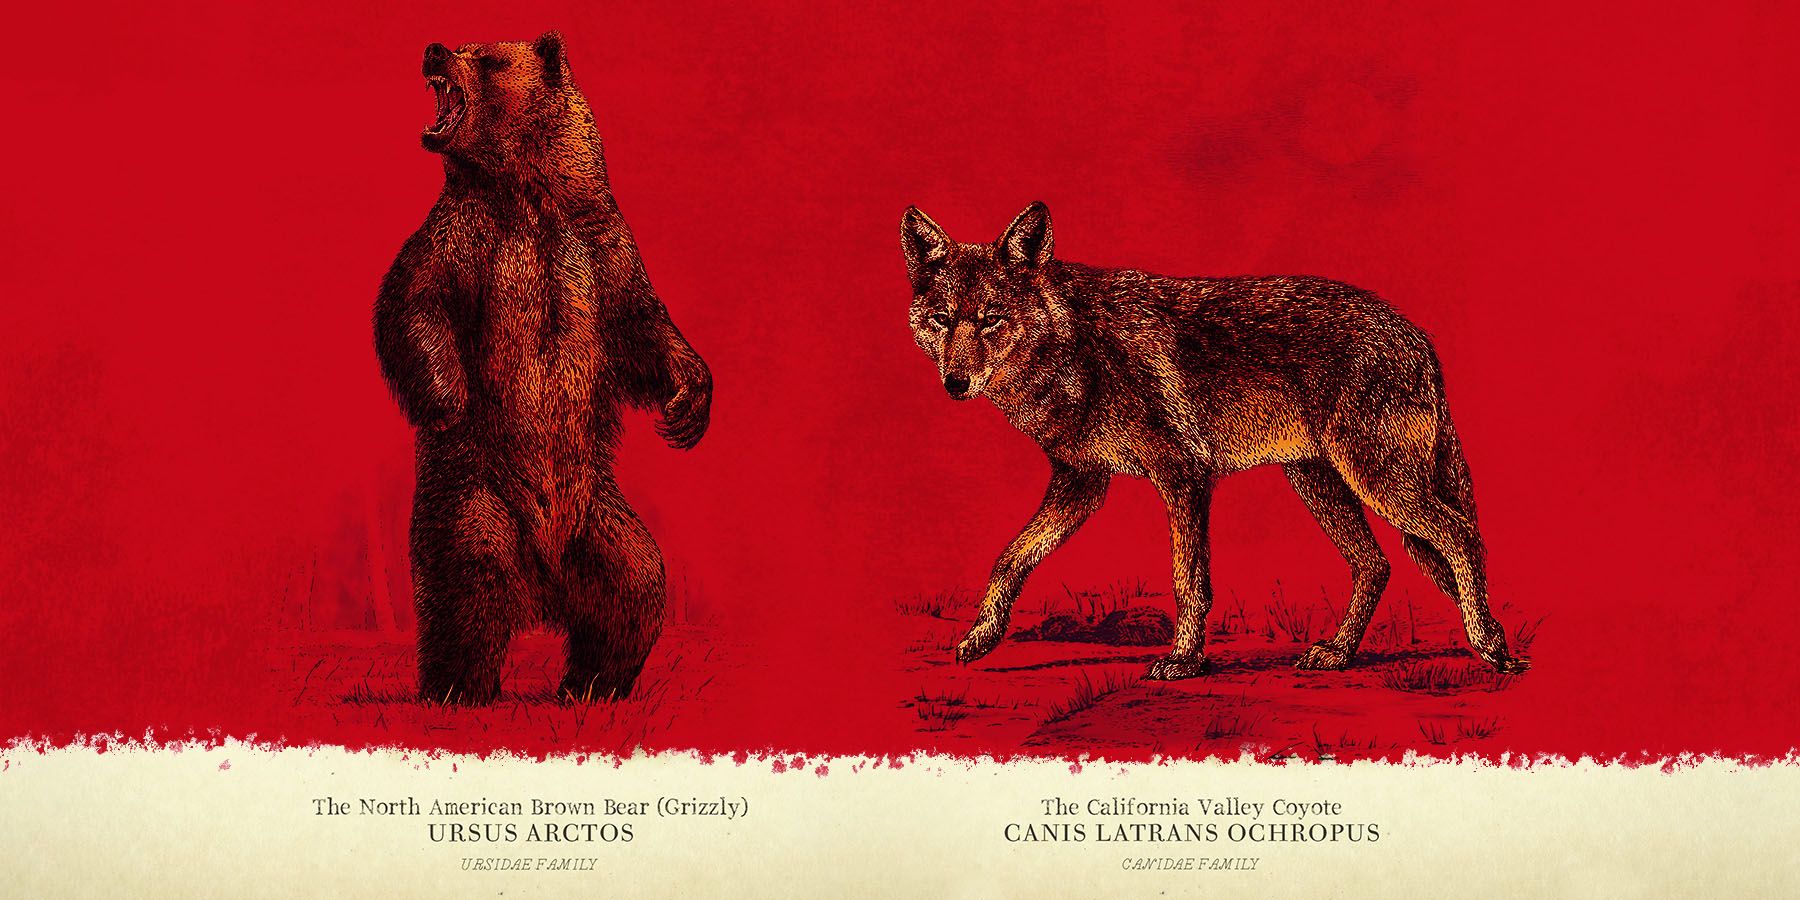 red-dead-redemption-2-wolf-vs-grizzly-bear-gamerant